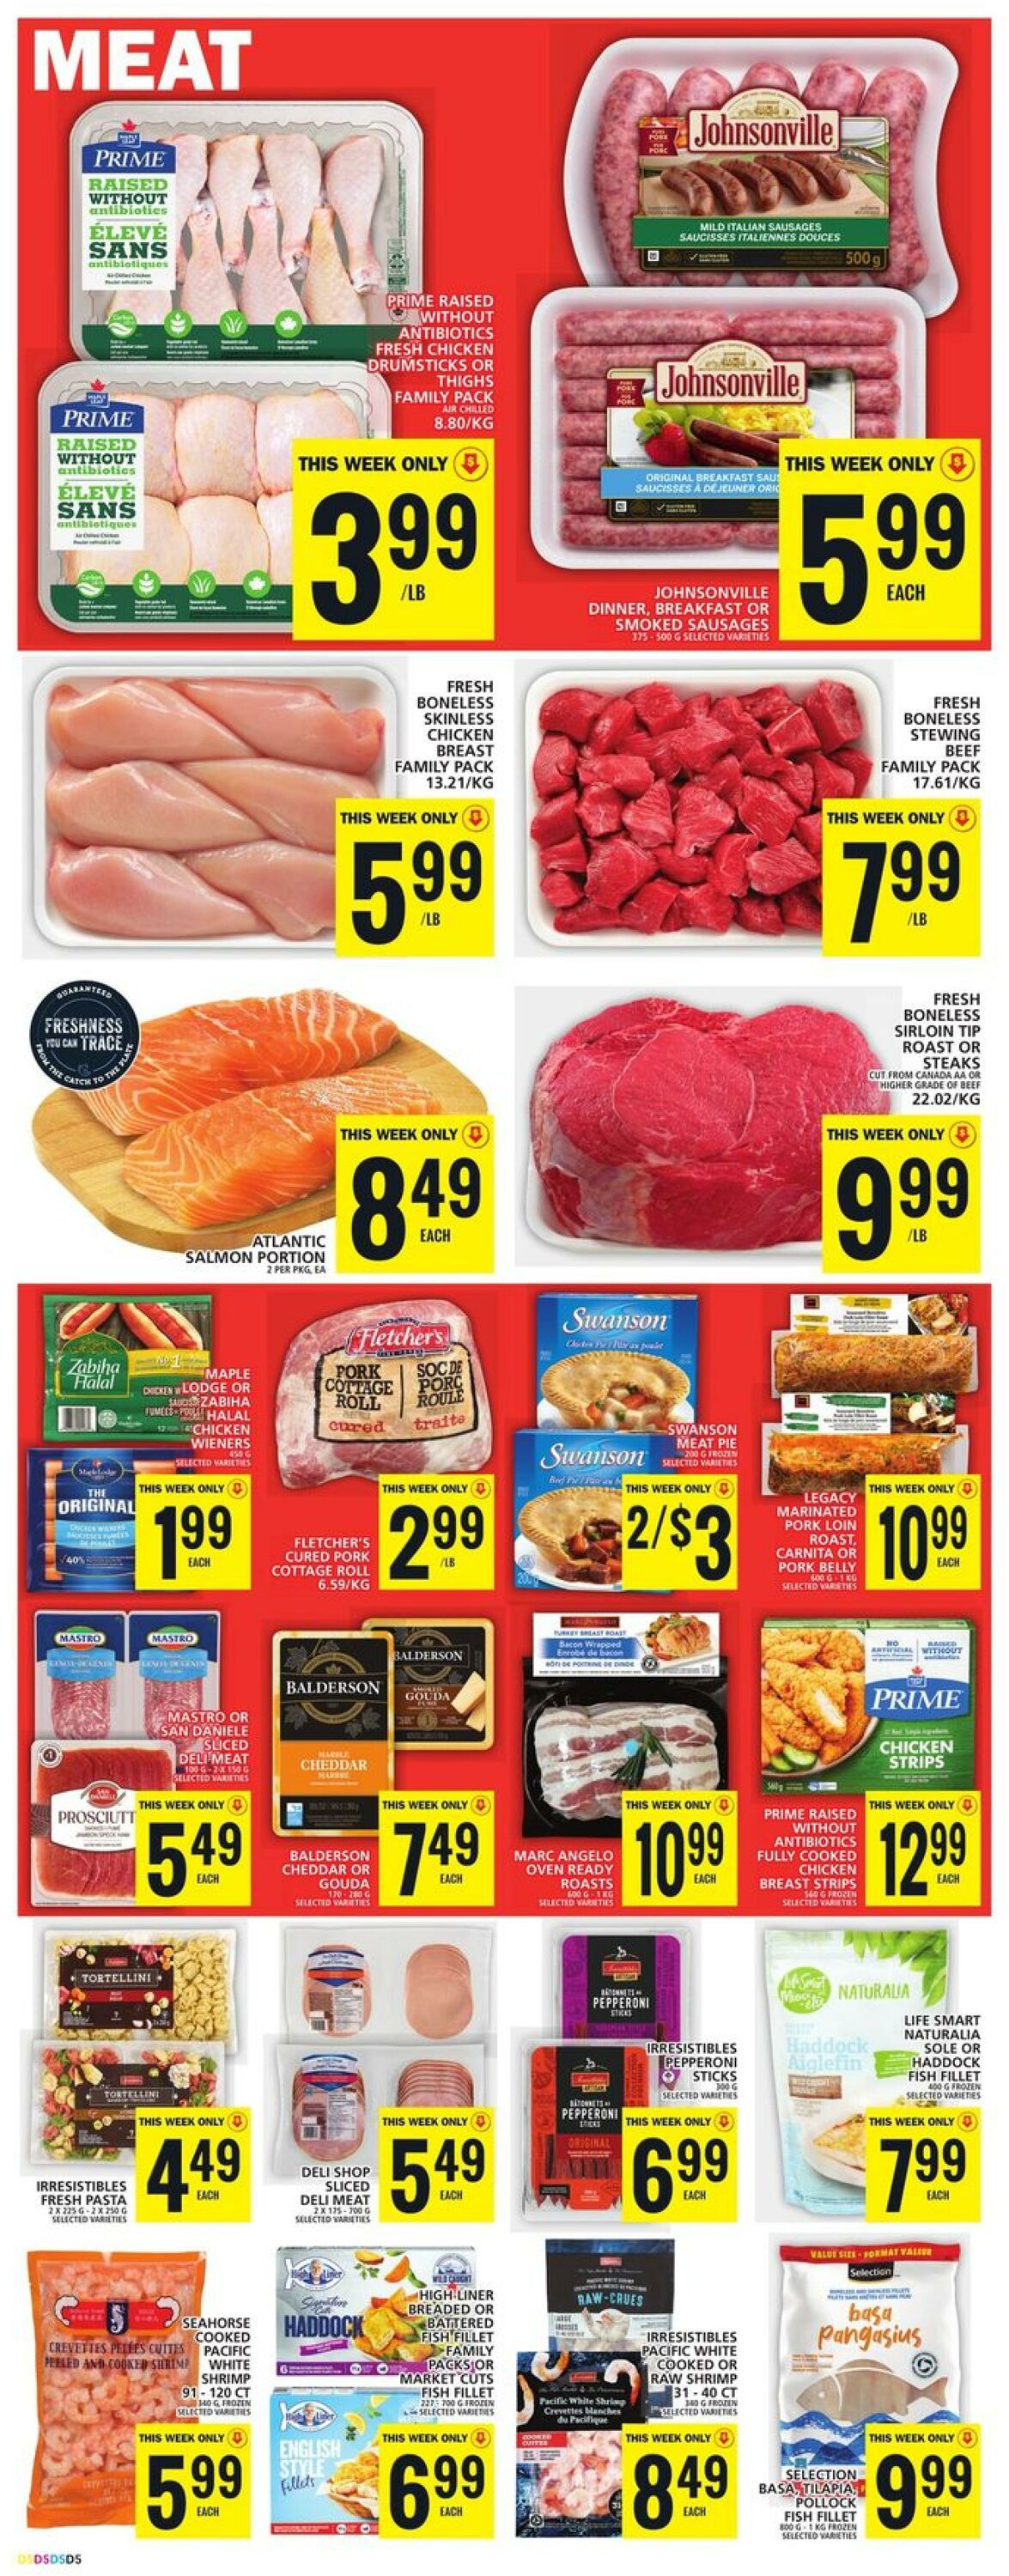 Food Basics Promotional Flyer - Valid from 11.01 to 17.01 - Page nb 8 ...